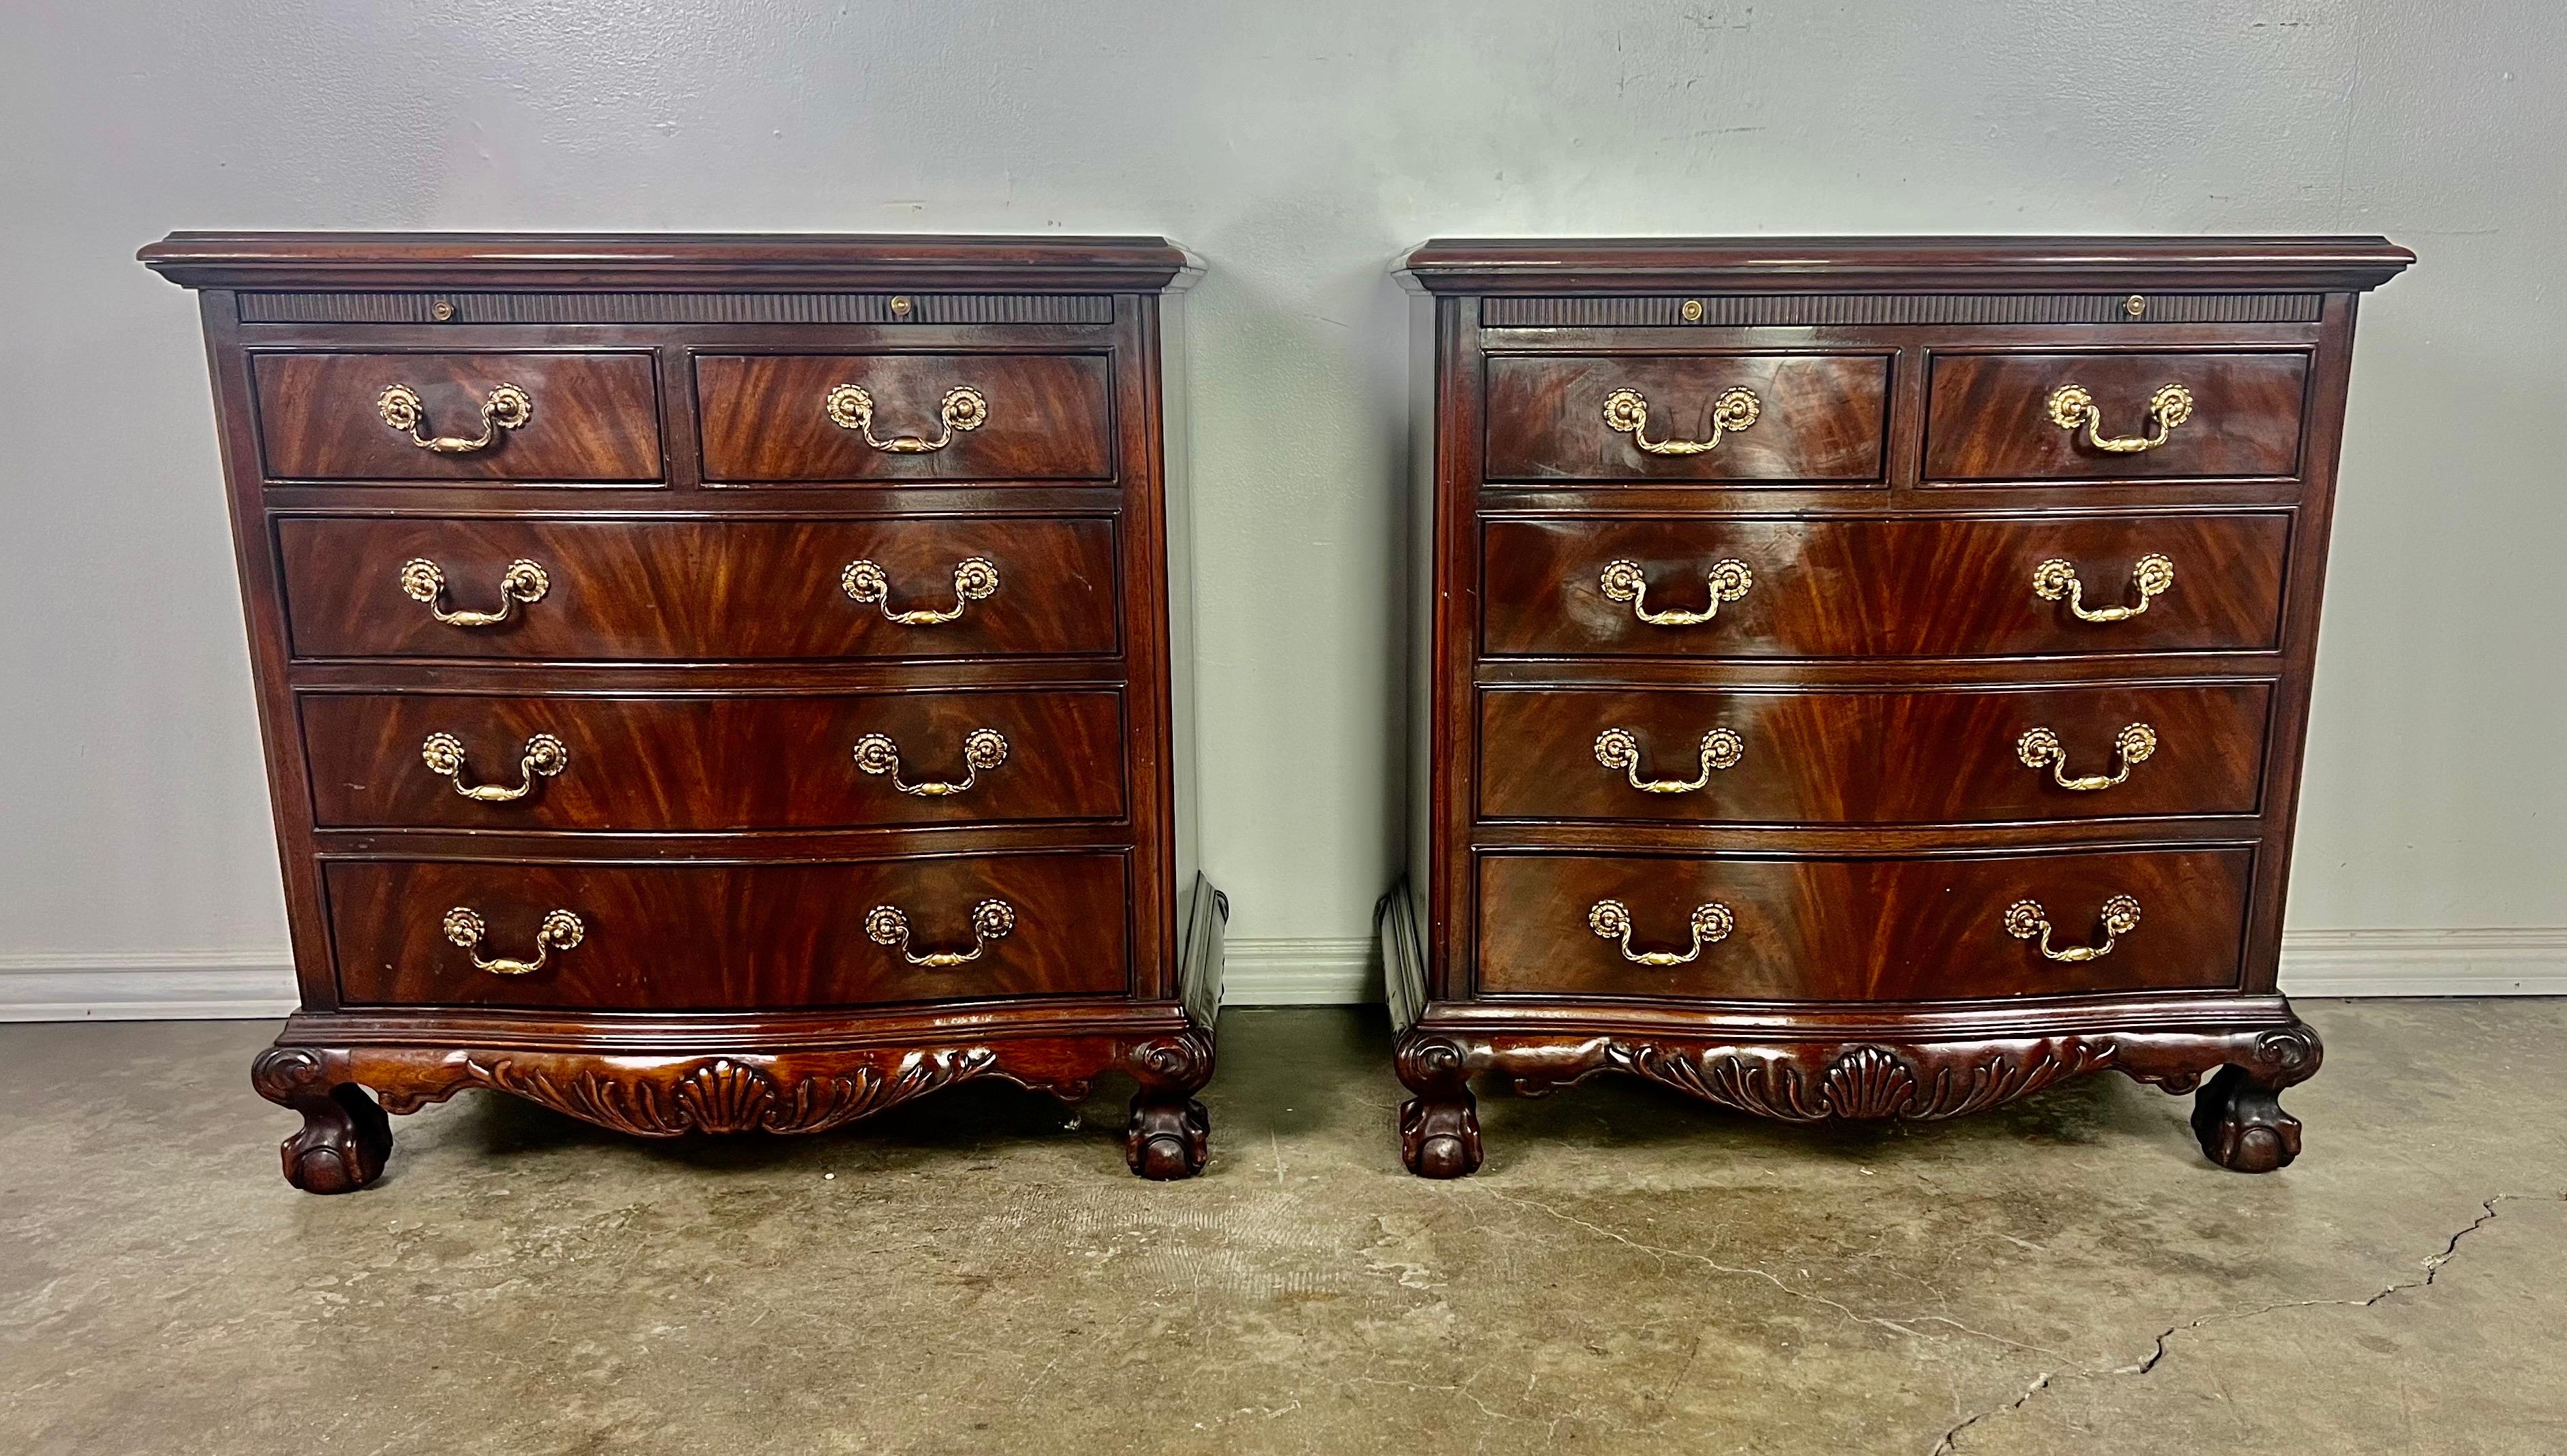 Drexel Heritage Cambridge flamed mahogany wood five drawer dresser chests.  Pullout on top of the drawers with brass knobs.  Quality American craftsmanship. Circa mid 20th Century.  The chests are detailed with a shell design at the base and stand